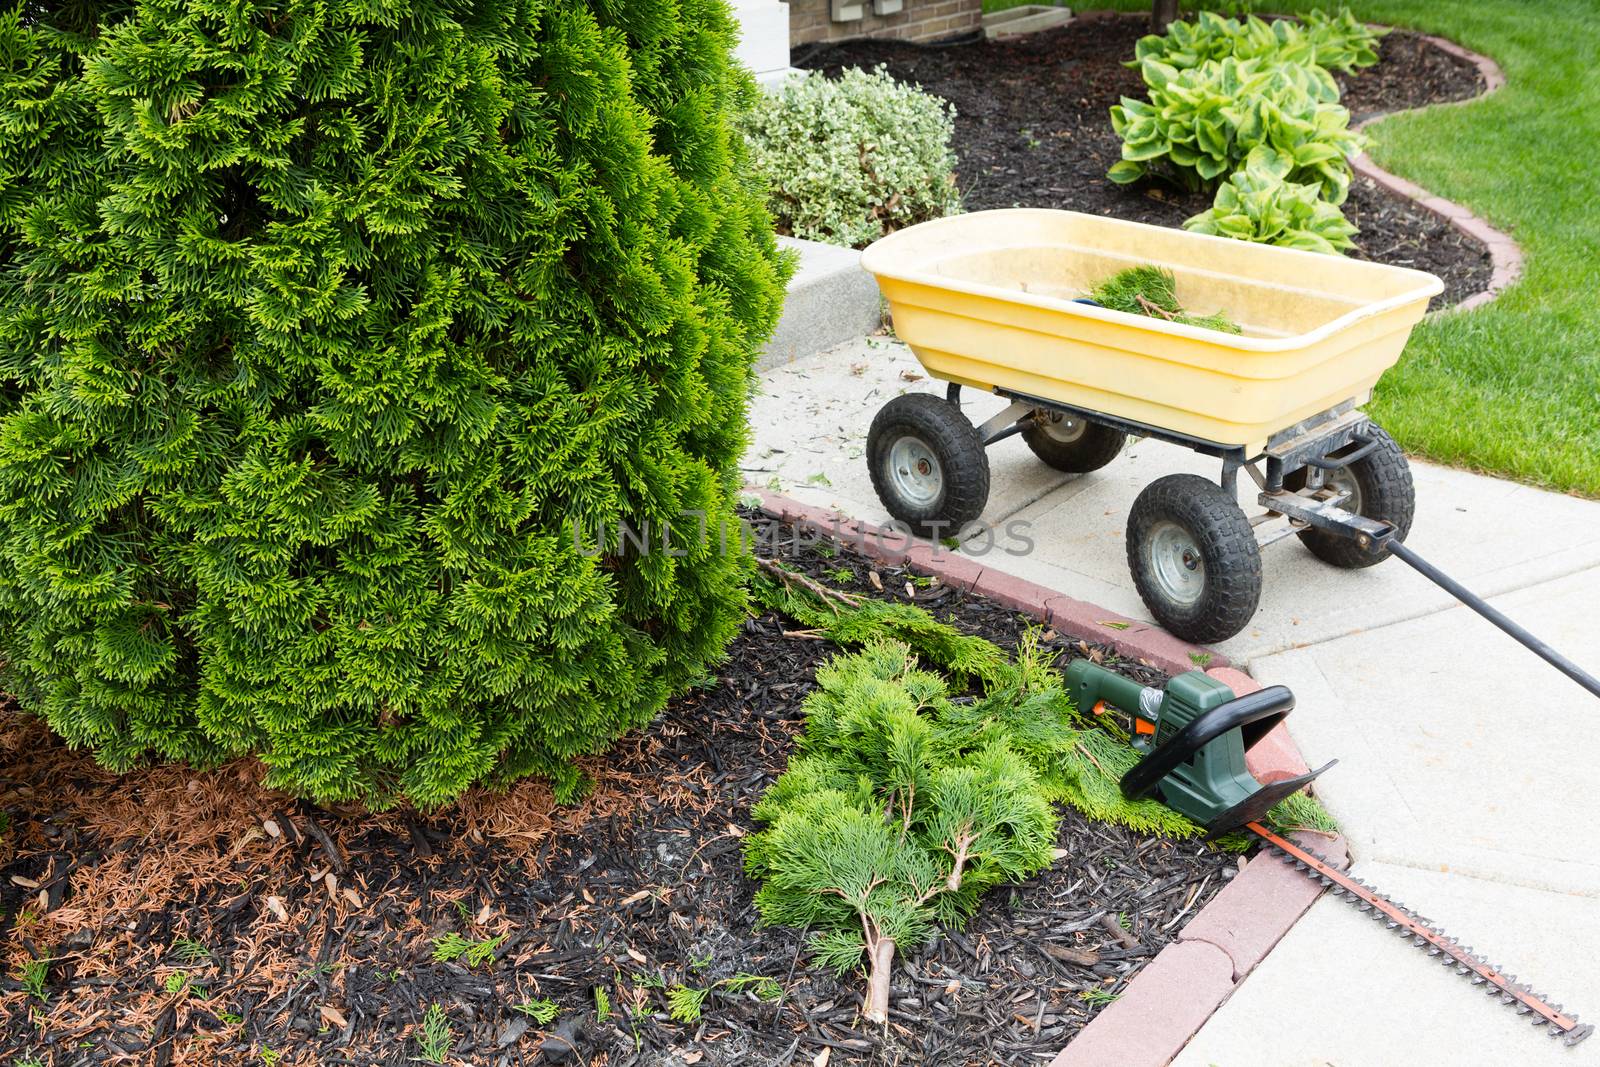 Garden tools used to trim arborvitaes in spring with a handheld hedge trimmer and small yellow metal cart standing alongside the evergreen Thuja trees